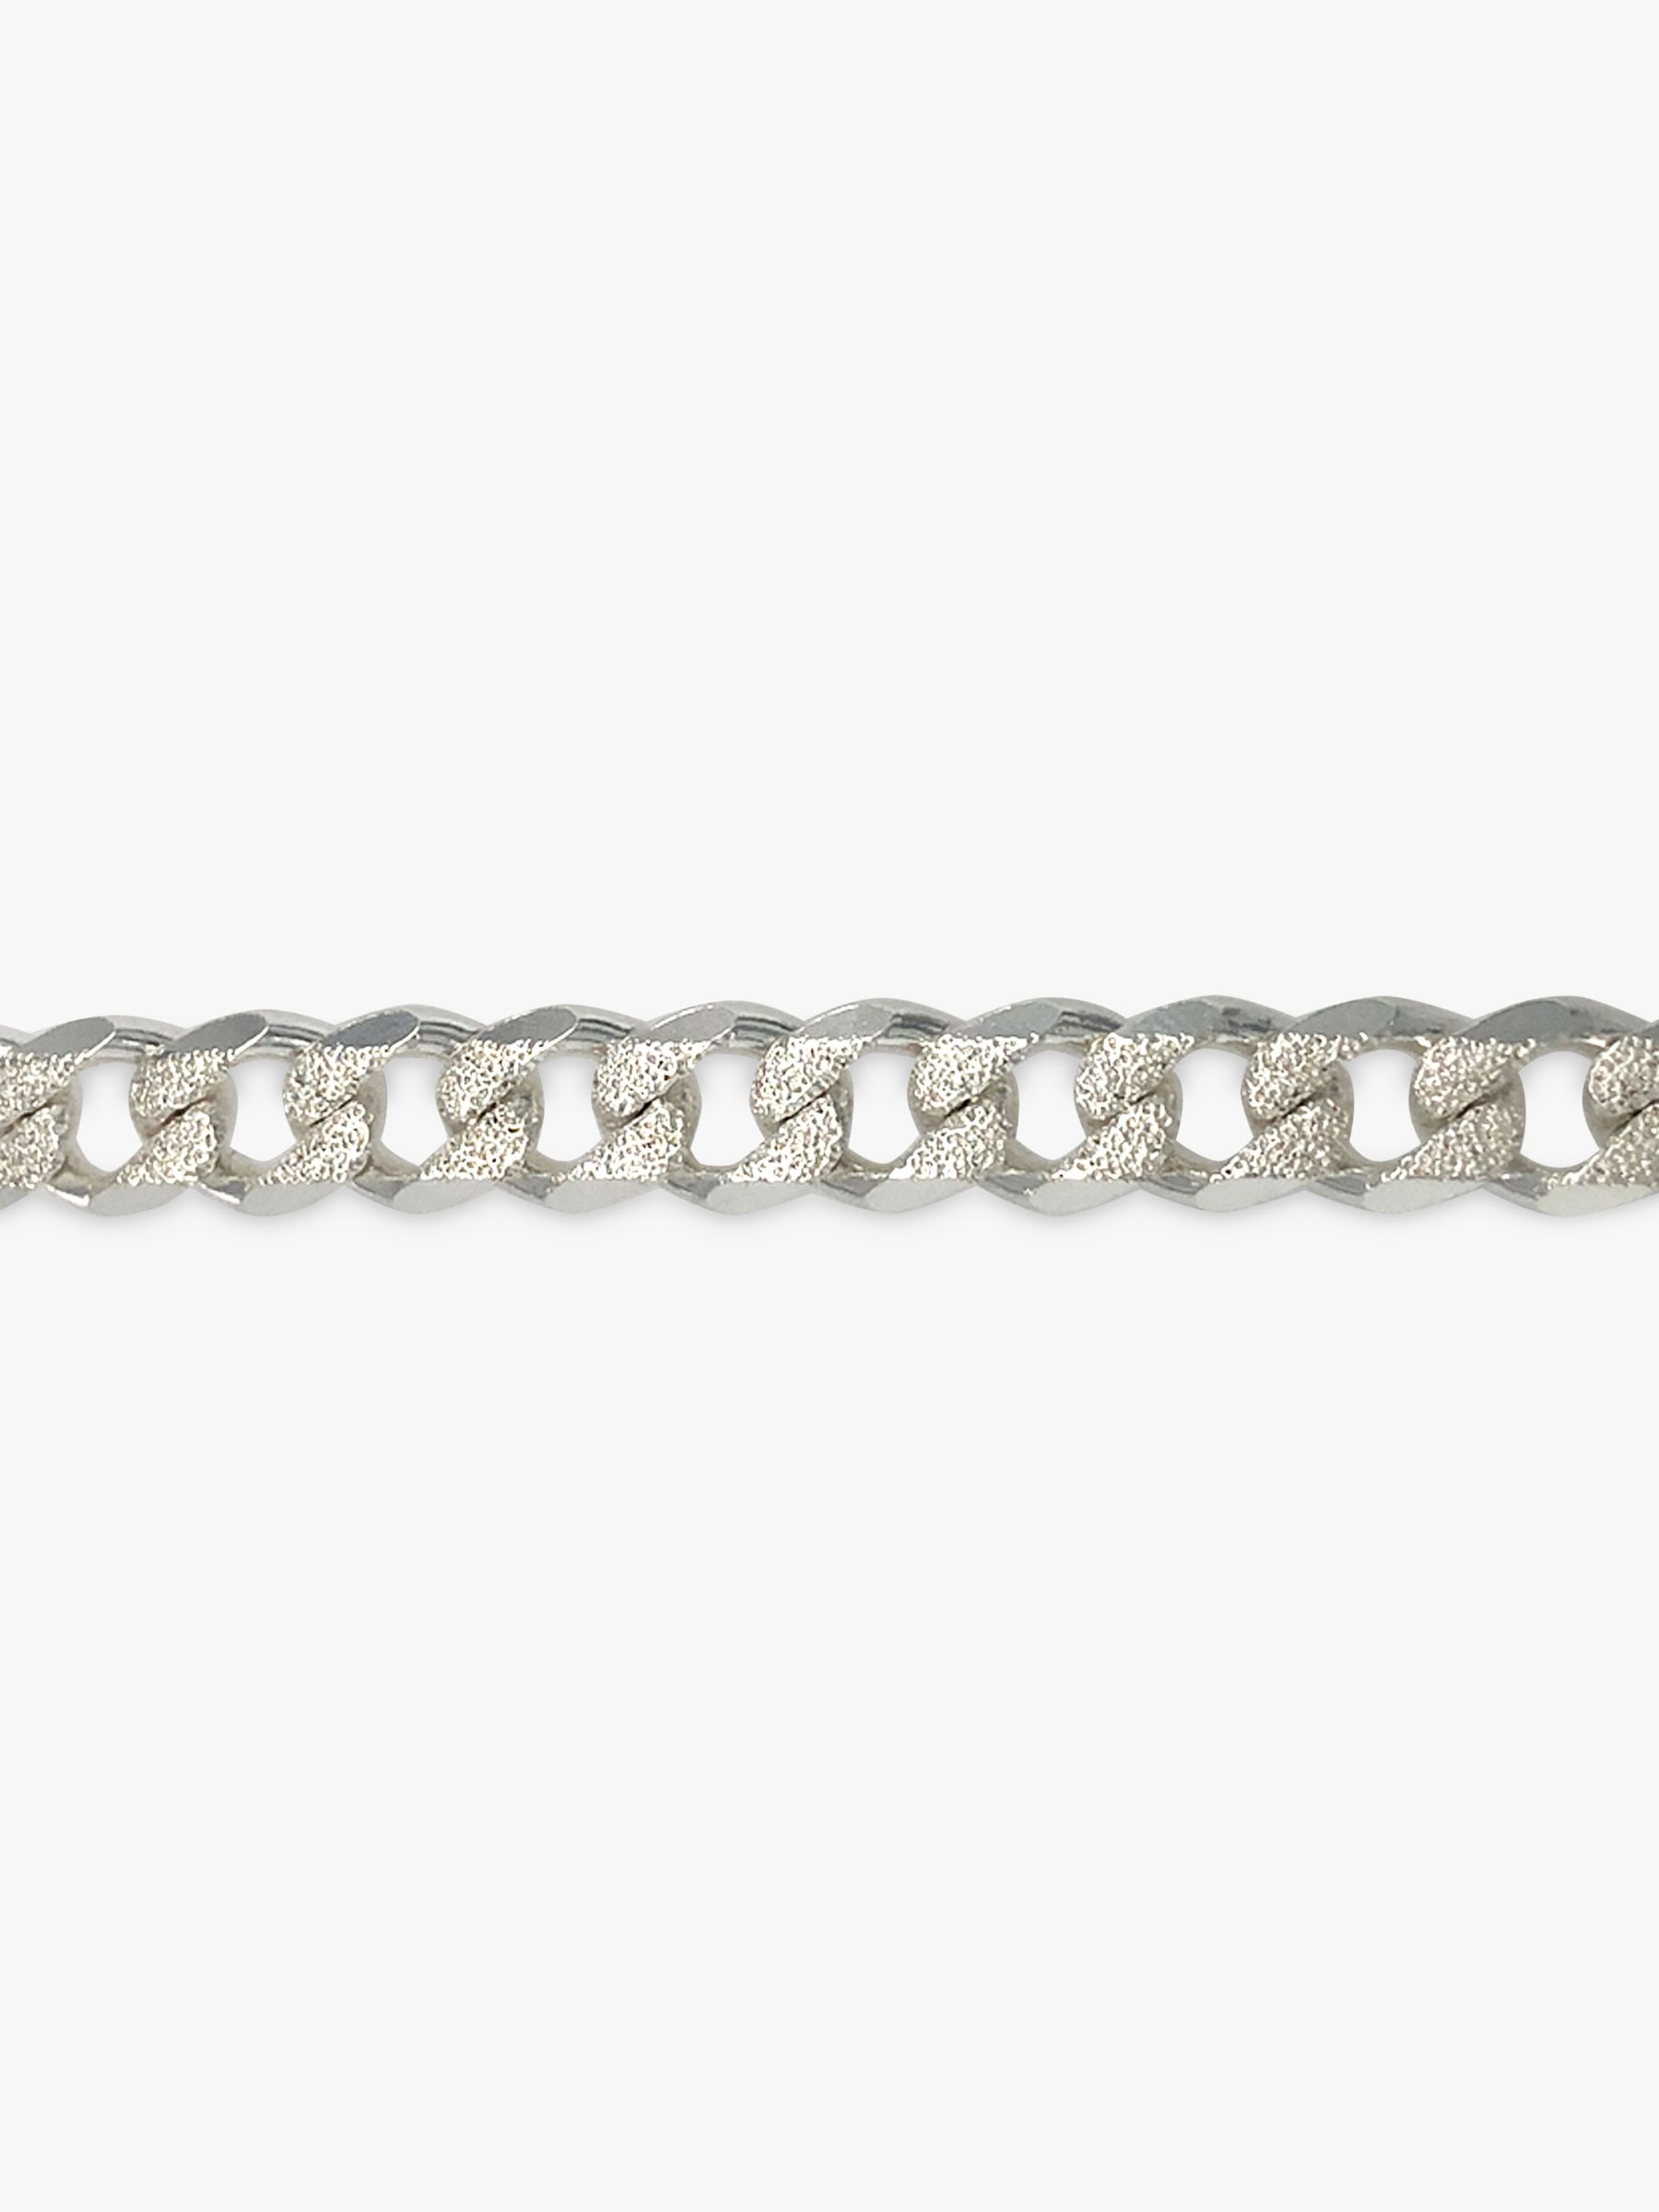 Buy Vintage Fine Jewellery Second Hand Textured Curb Link Chain Necklace, Dated Circa 1980s Online at johnlewis.com